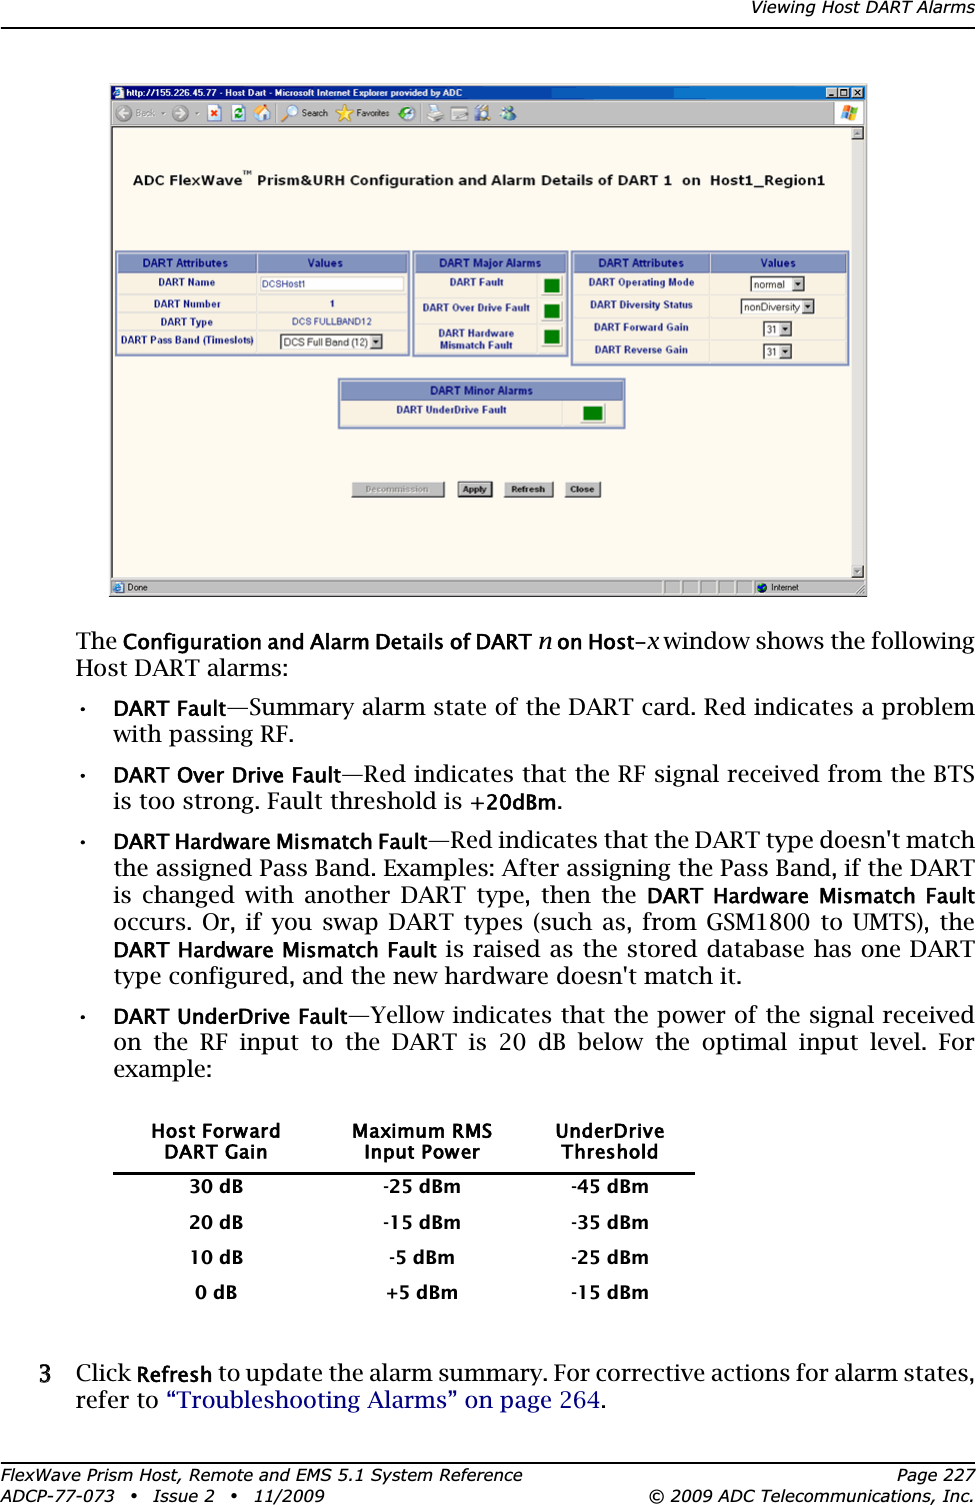 Viewing Host DART AlarmsFlexWave Prism Host, Remote and EMS 5.1 System Reference Page 227ADCP-77-073 • Issue 2 • 11/2009 © 2009 ADC Telecommunications, Inc.TheConfiguration and Alarm Details of DARTnon Host-x window shows the following Host DART alarms:•DART Fault—Summary alarm state of the DART card. Red indicates a problem with passing RF.•DART Over Drive Fault—Red indicates that the RF signal received from the BTS is too strong. Fault threshold is +20dBm.•DART Hardware Mismatch Fault—Red indicates that the DART type doesn&apos;t match the assigned Pass Band. Examples: After assigning the Pass Band, if the DART is changed with another DART type, then the DART  Hardware  Mismatch  Faultoccurs. Or, if you swap DART types (such as, from GSM1800 to UMTS), the DART Hardware Mismatch Fault is raised as the stored database has one DART type configured, and the new hardware doesn&apos;t match it.•DART UnderDrive Fault—Yellow indicates that the power of the signal received on the RF input to the DART is 20 dB below the optimal input level. For example:33 Click Refresh to update the alarm summary. For corrective actions for alarm states, refer to “Troubleshooting Alarms” on page 264.Host ForwardDART GainMaximum RMSInput PowerUnderDriveThreshold30 dB -25 dBm -45 dBm20 dB -15 dBm -35 dBm10 dB -5 dBm -25 dBm0 dB +5 dBm -15 dBm